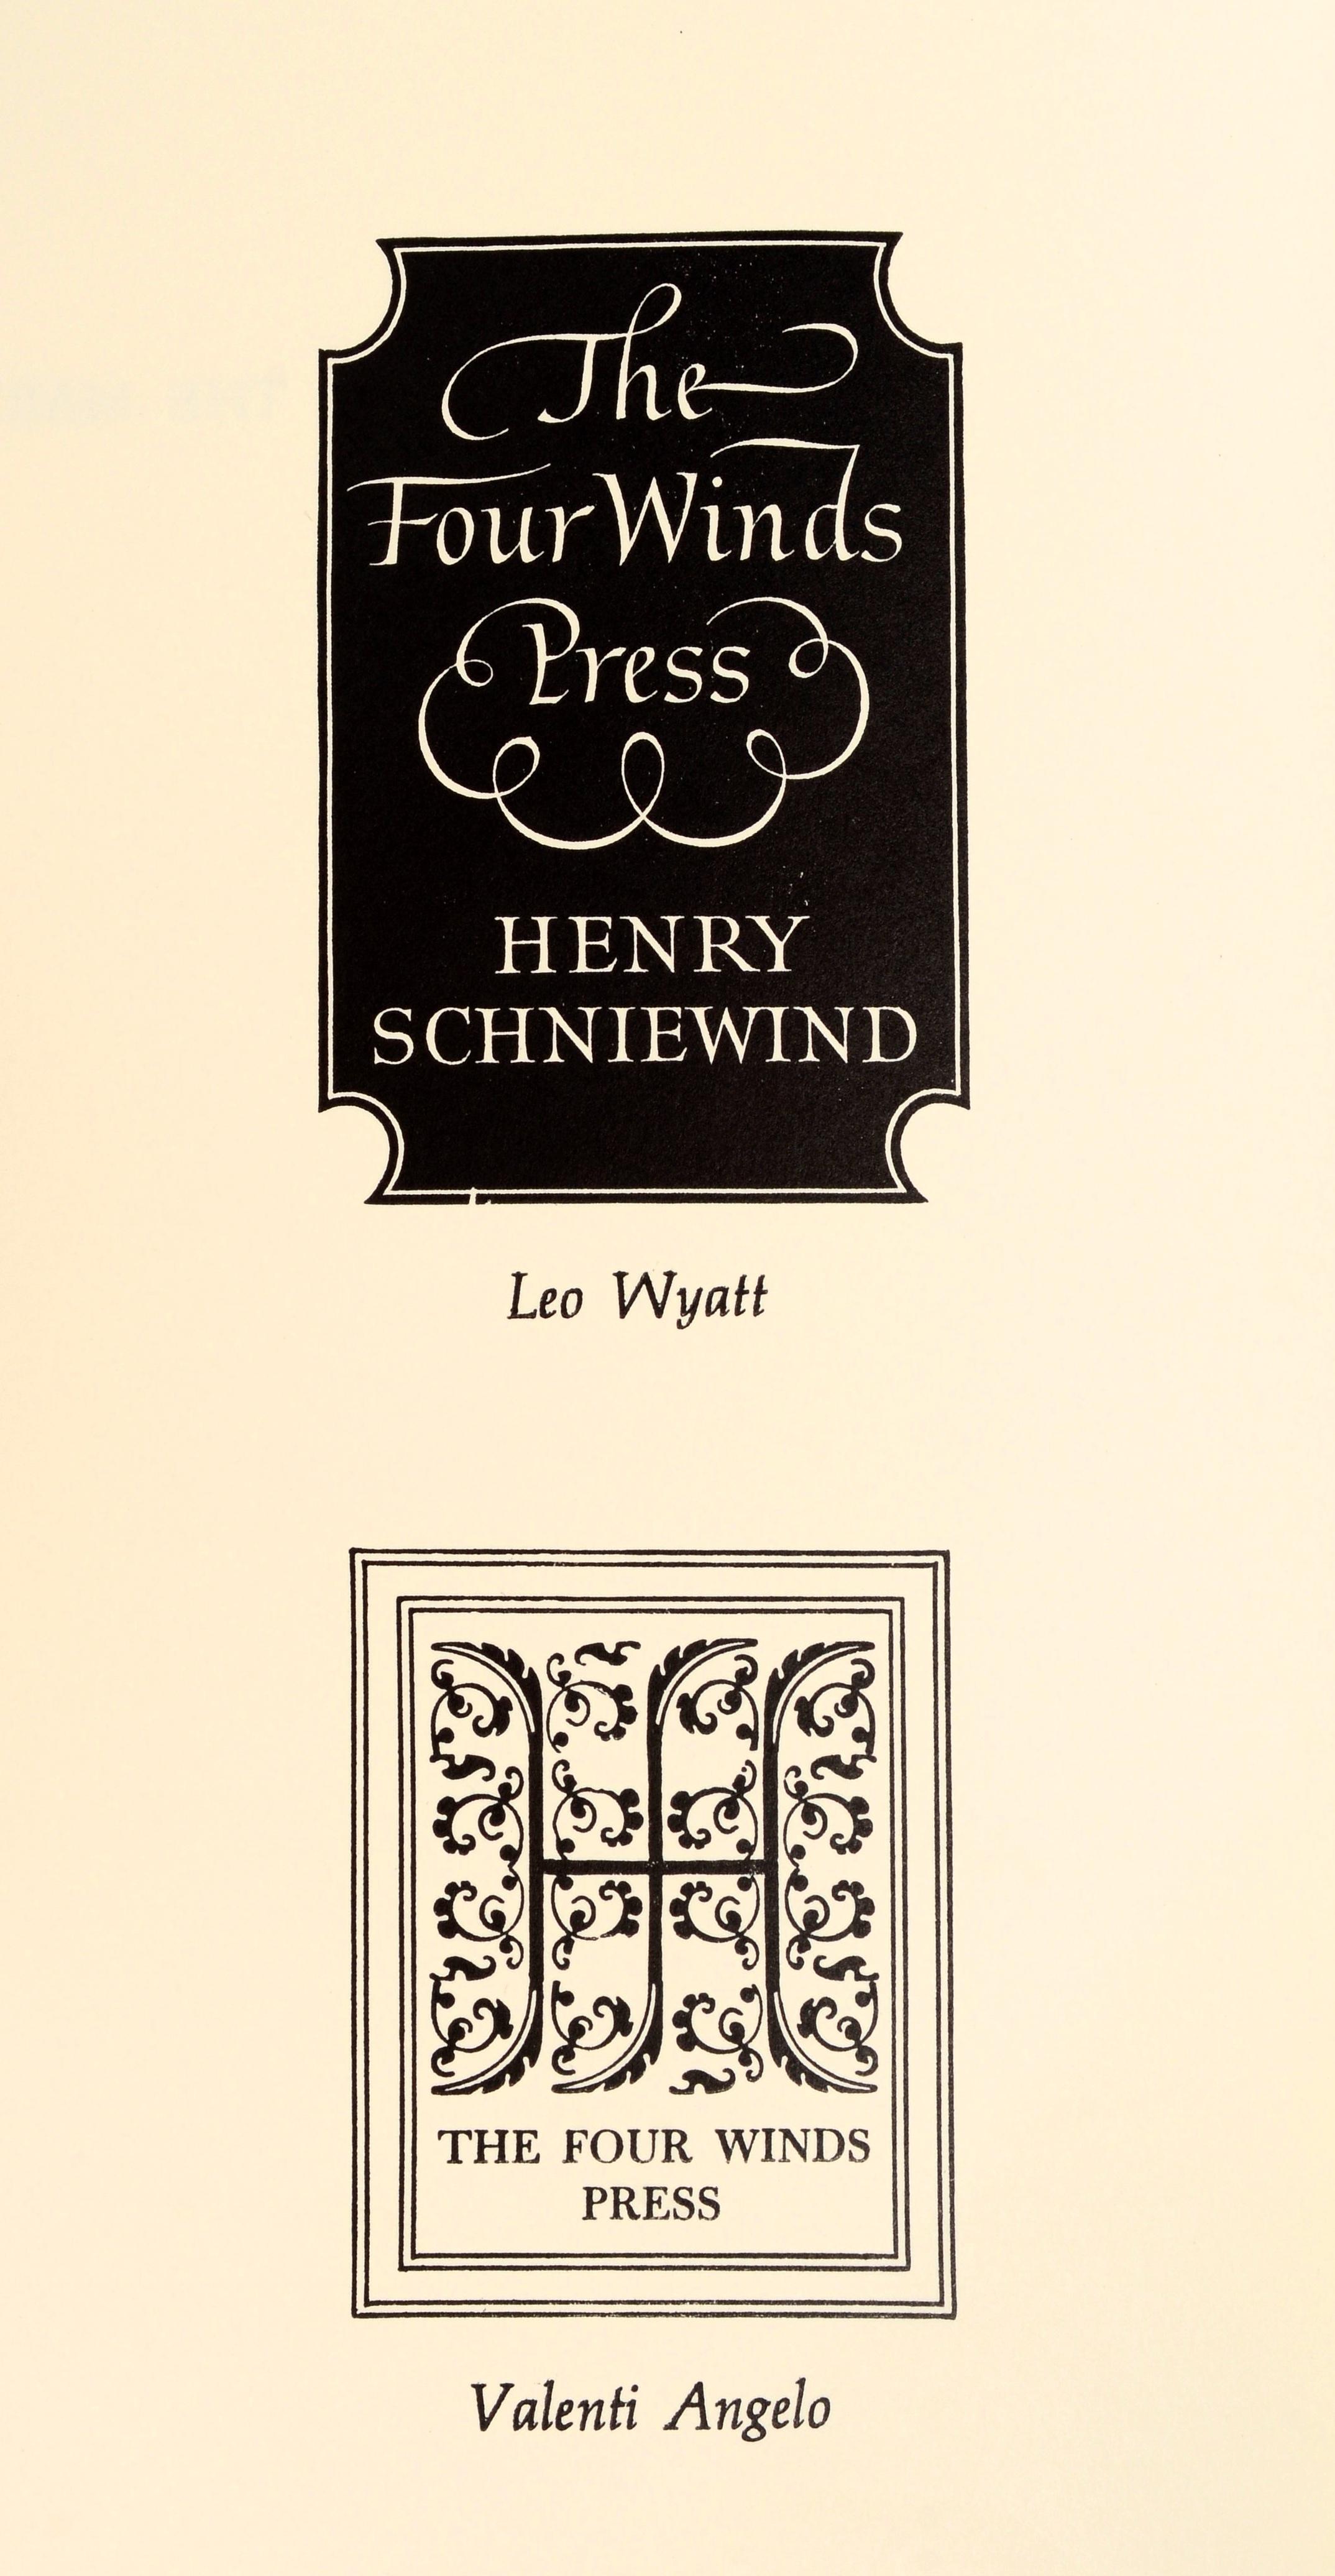 Two Private Presses The Four Wind Press and the Stone House Press on Long Island by Joan Digby, Limited 1st Ed 1/200. Published by The Four Winds Press, New York, 1988. The story of two small publishing houses. 
NPT Books a division of N.P. Trent